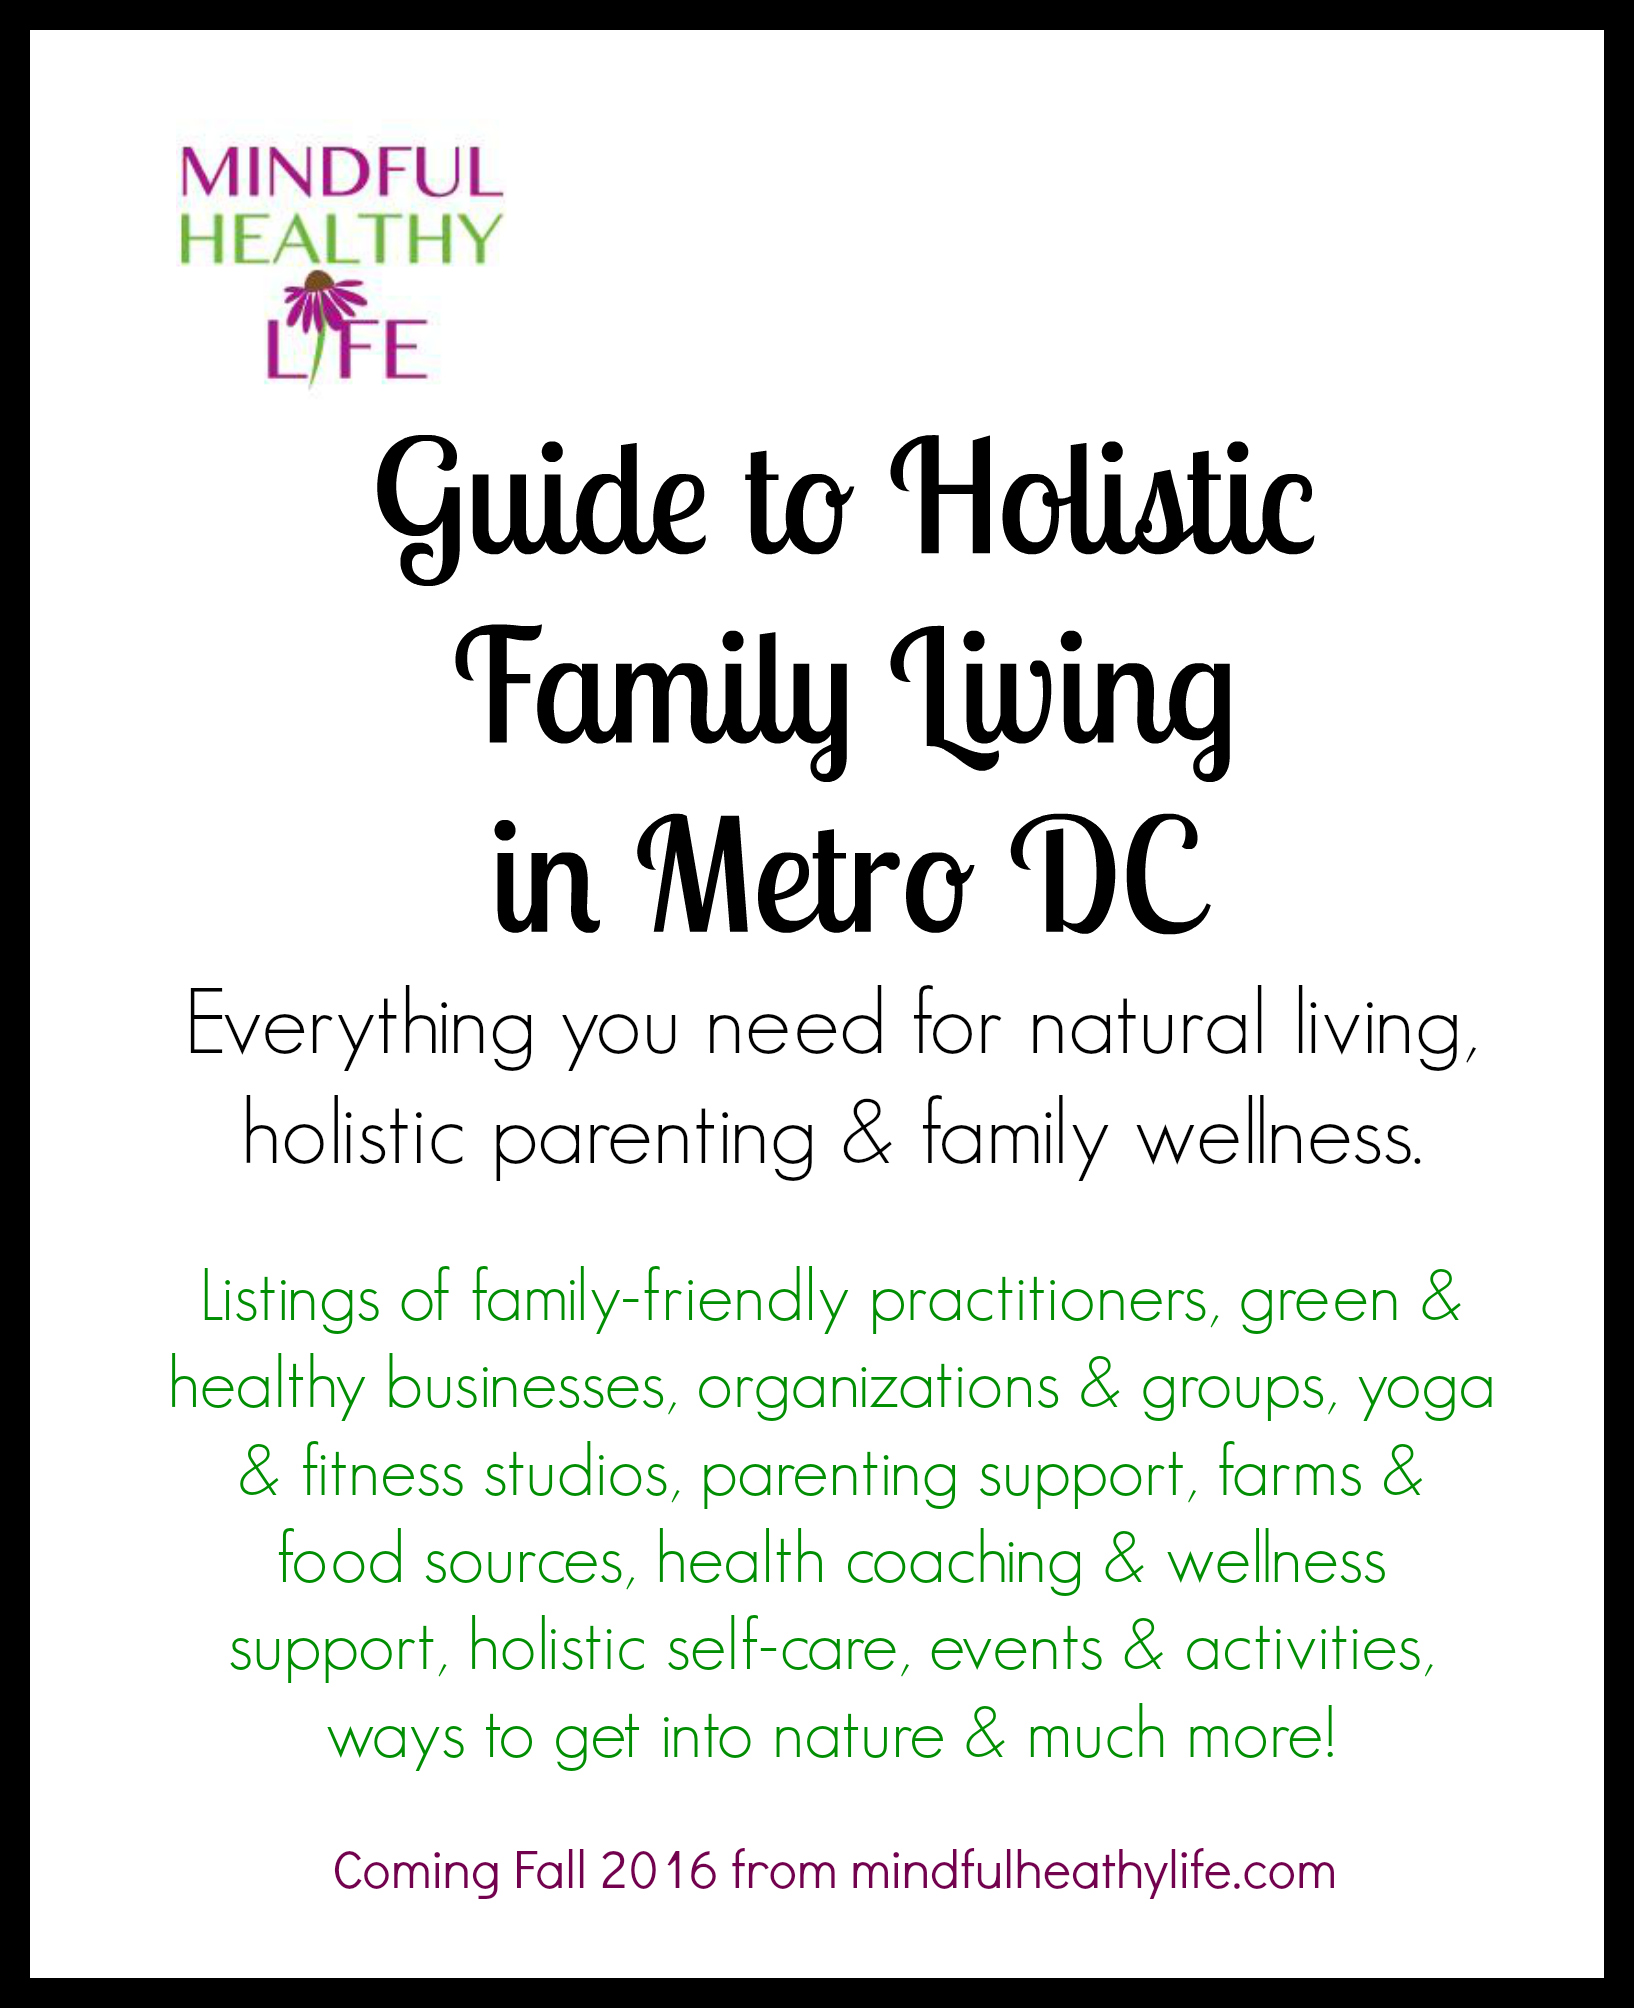 Mindful Healthy Life Guide to Holistic Family Living in Metro DC - book cover border